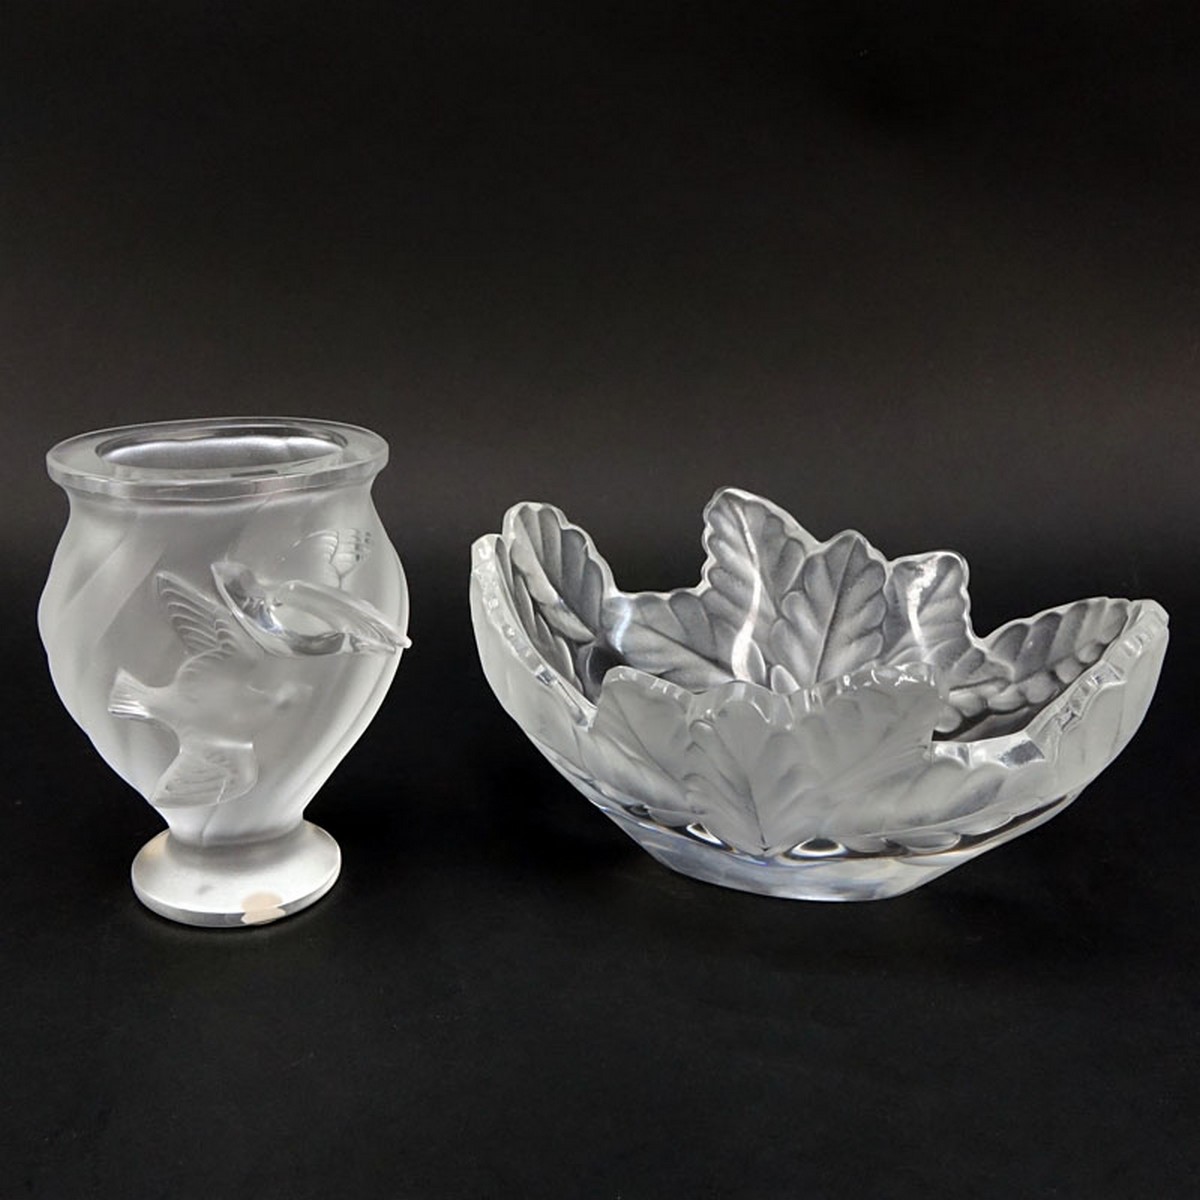 Grouping of Two (2): Lalique Compiegne Crystal Bowl, Lalique Crystal Dove Crystal Vase. Each signed appropriately.